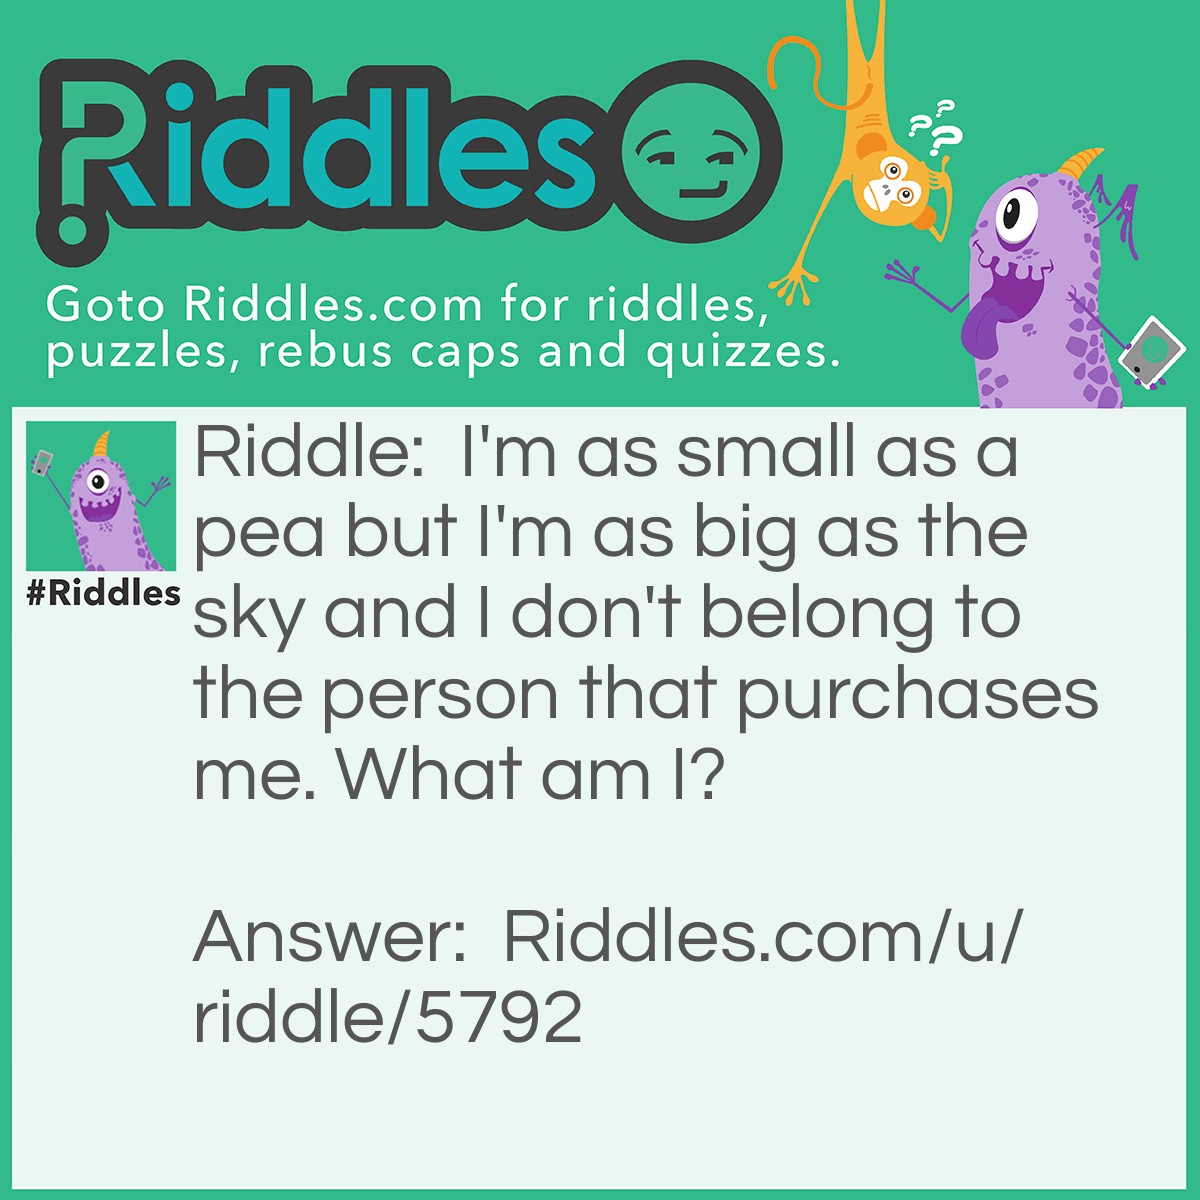 Riddle: I'm as small as a pea but I'm as big as the sky and I don't belong to the person that purchases me. What am I? Answer: A Gift.